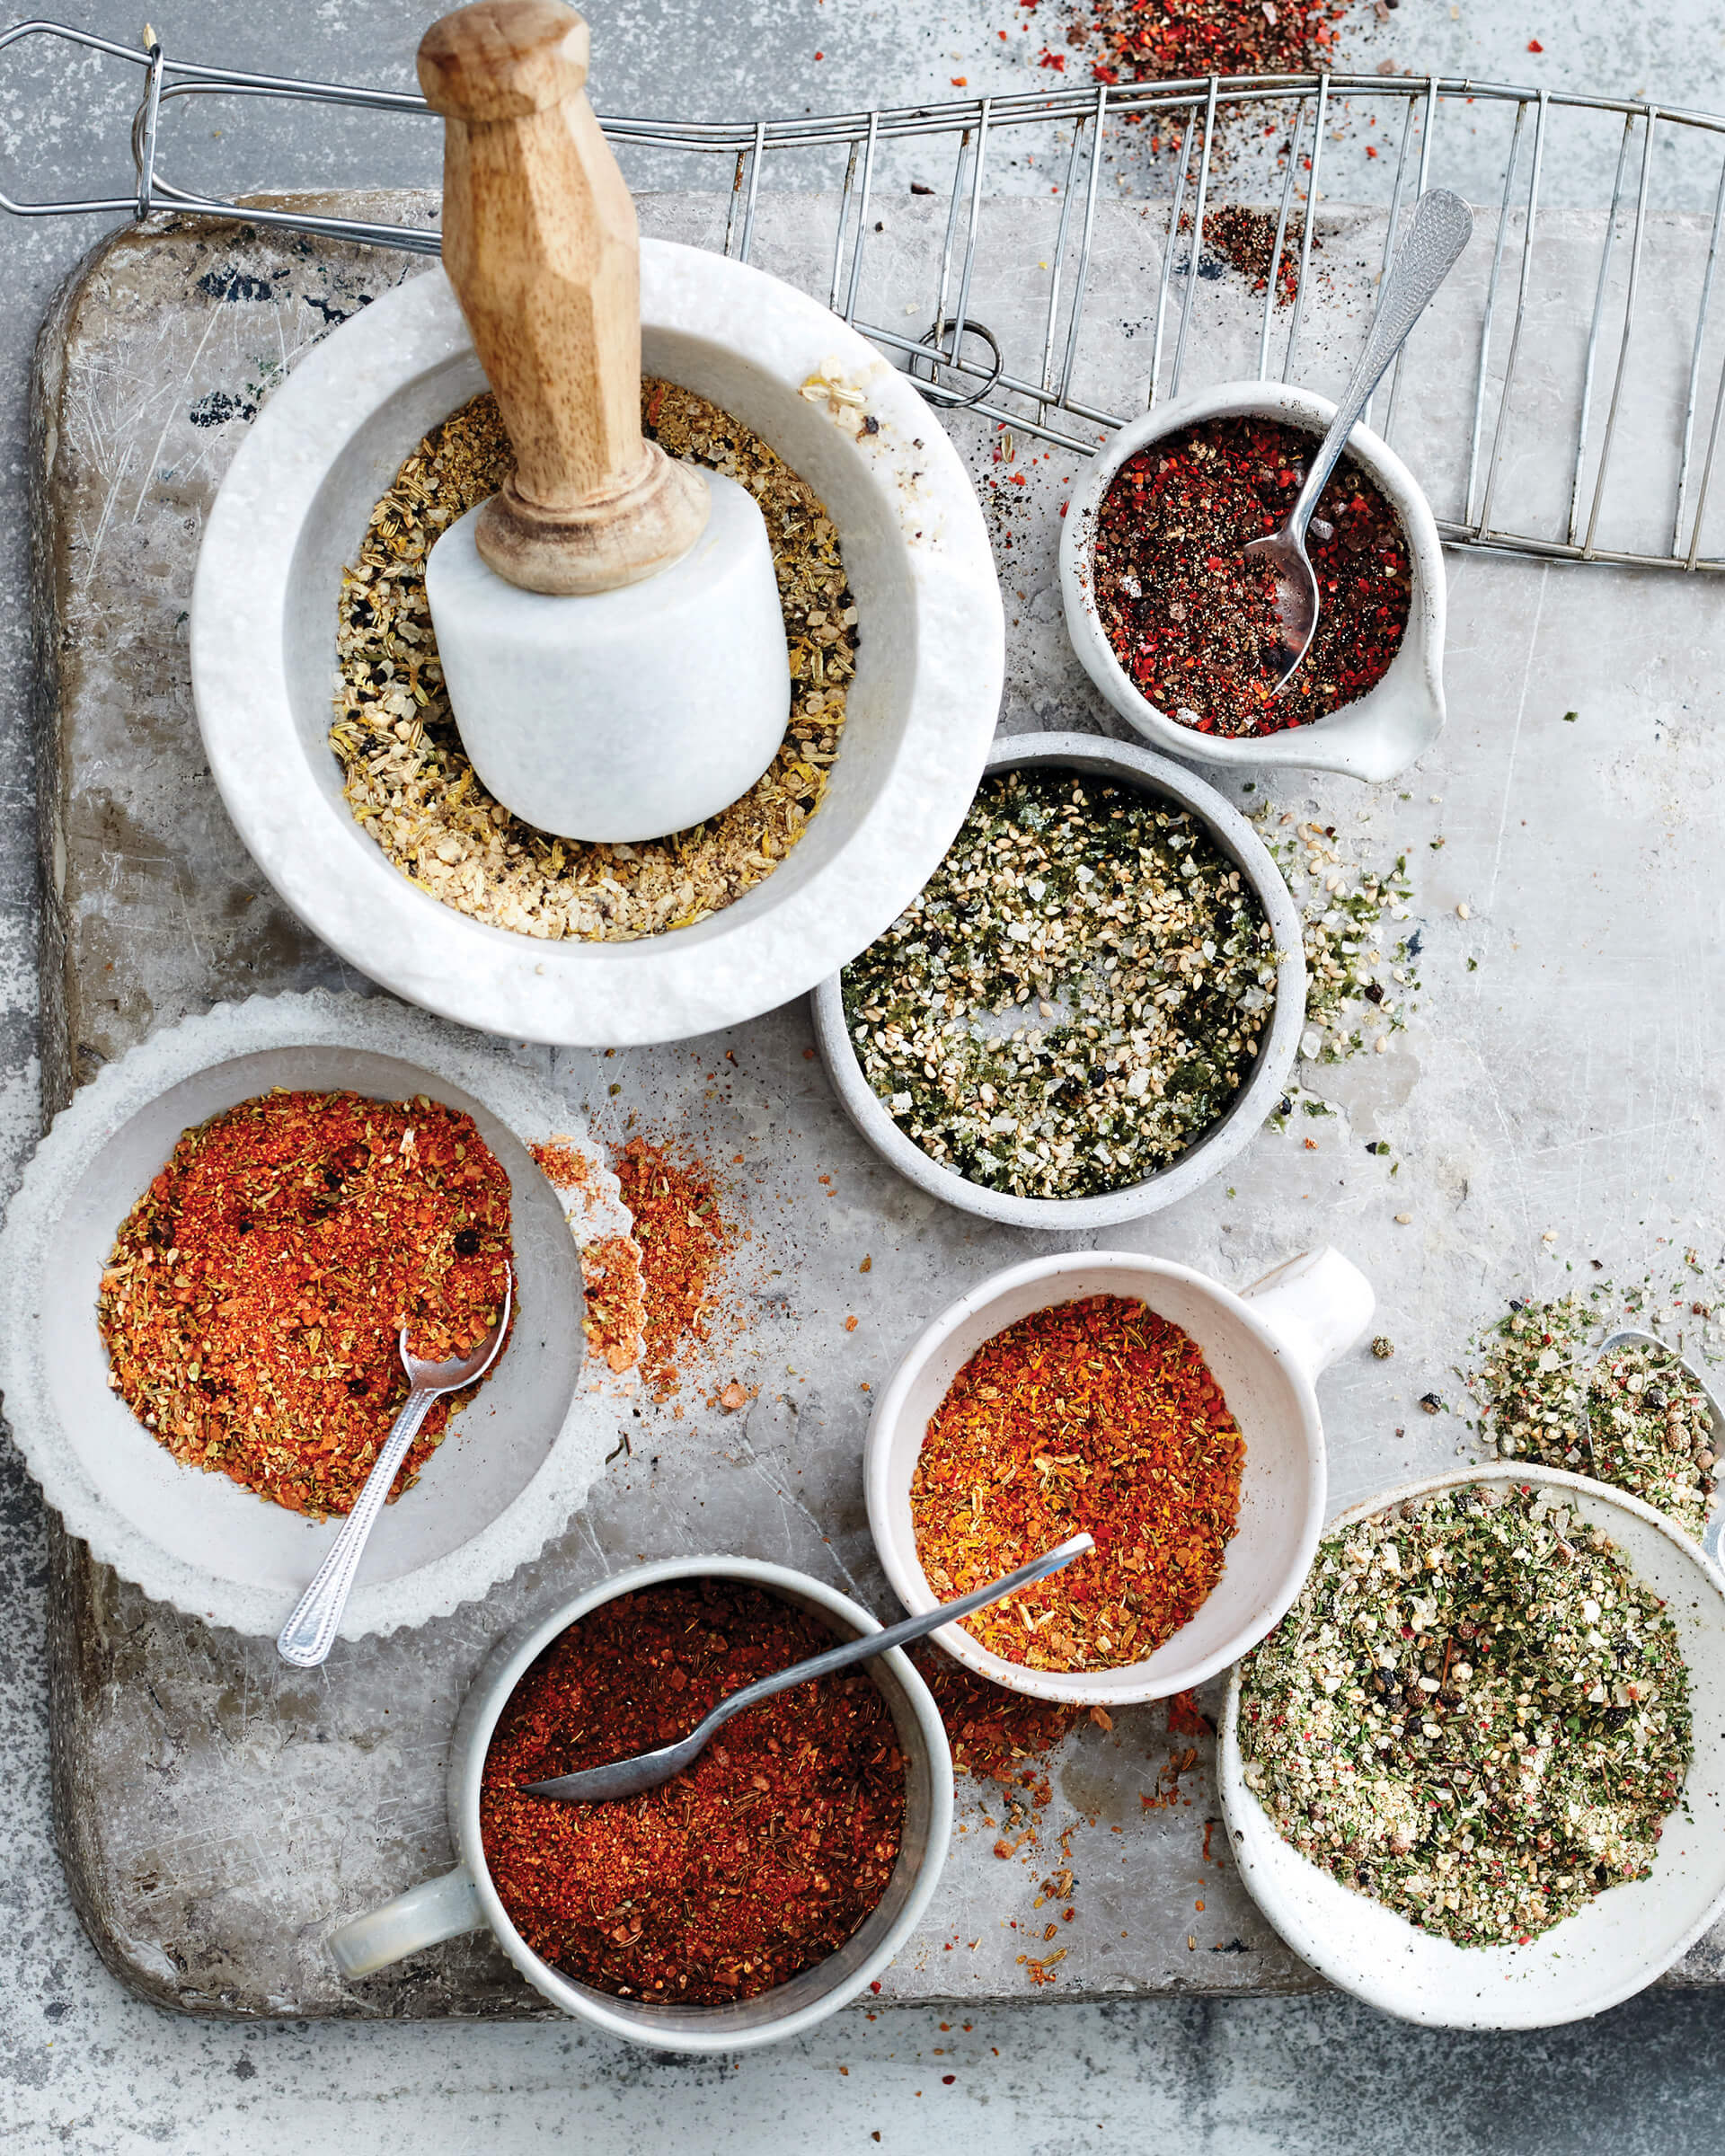 Bowls of mixed spices next to a white mortar and pestle